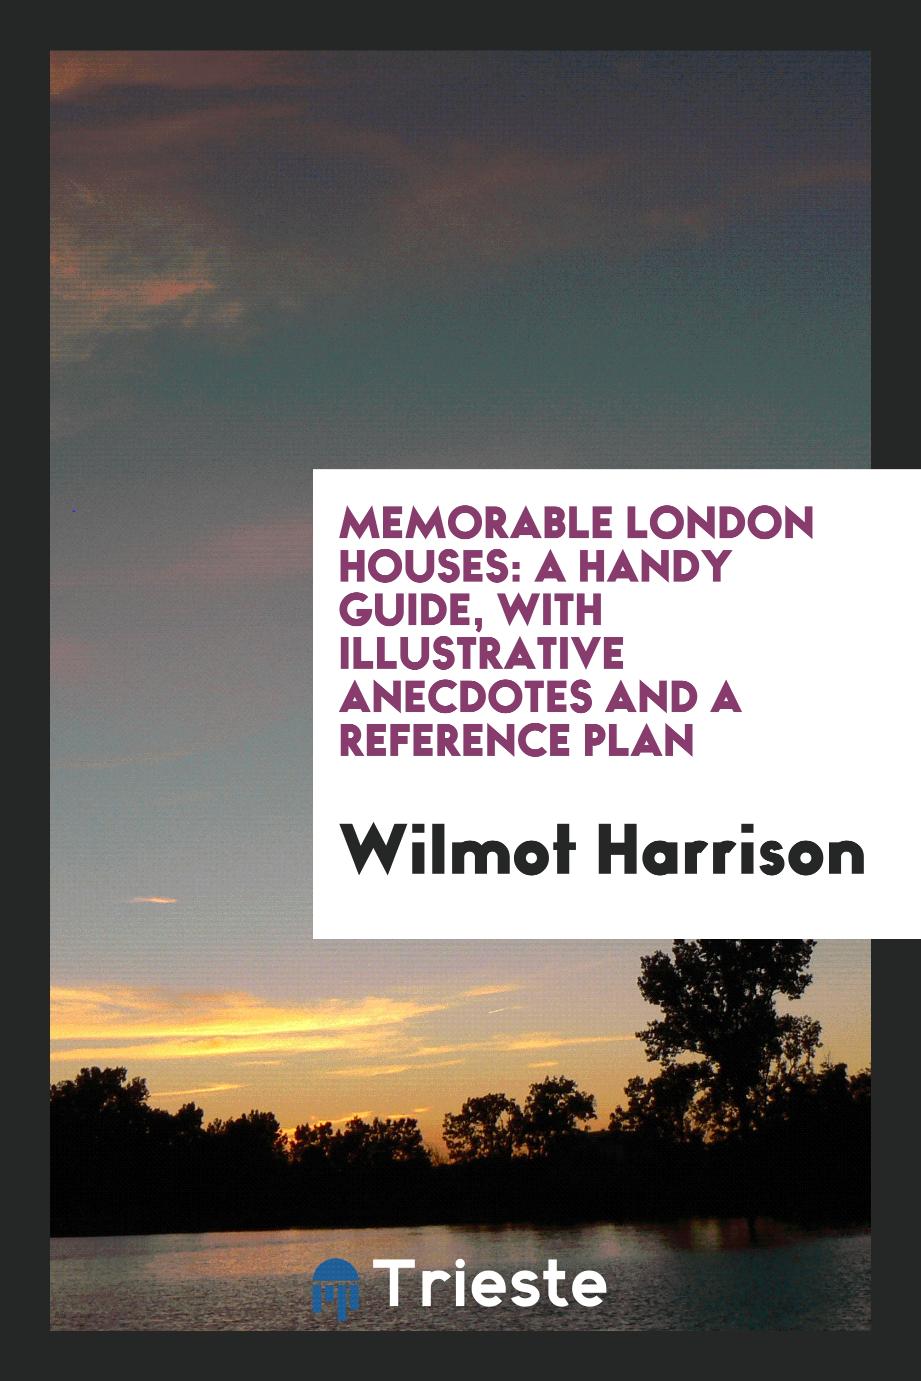 Memorable London houses: a handy guide, with illustrative anecdotes and a reference plan